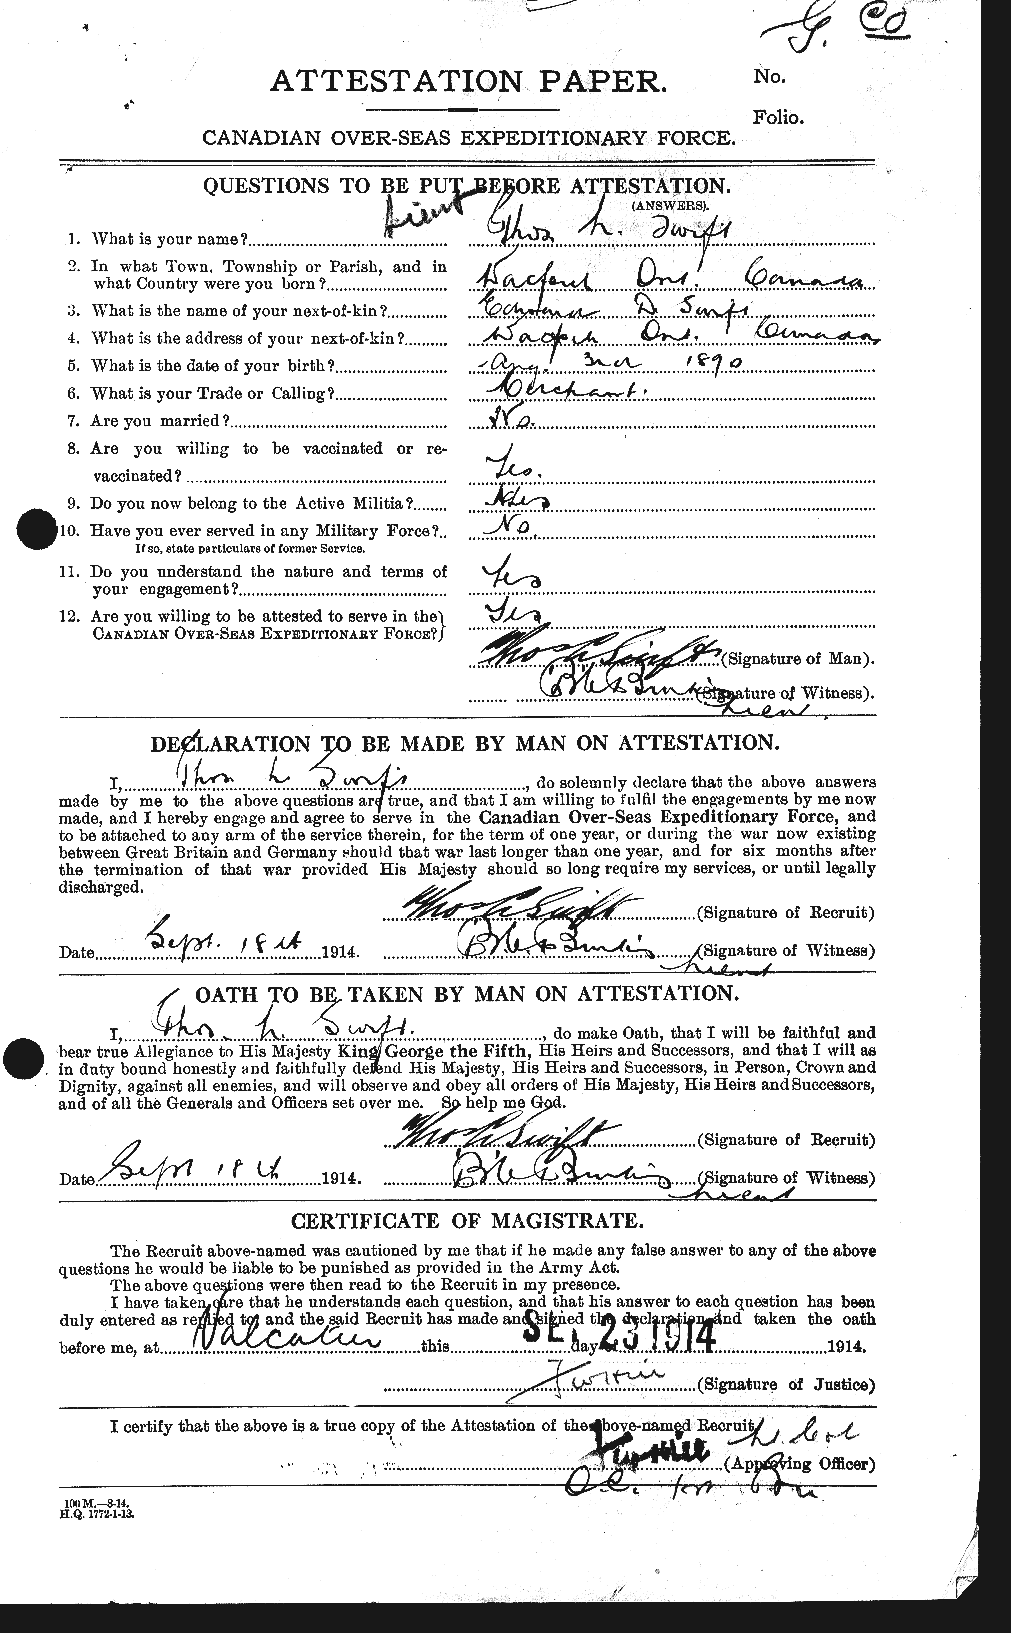 Personnel Records of the First World War - CEF 128518a